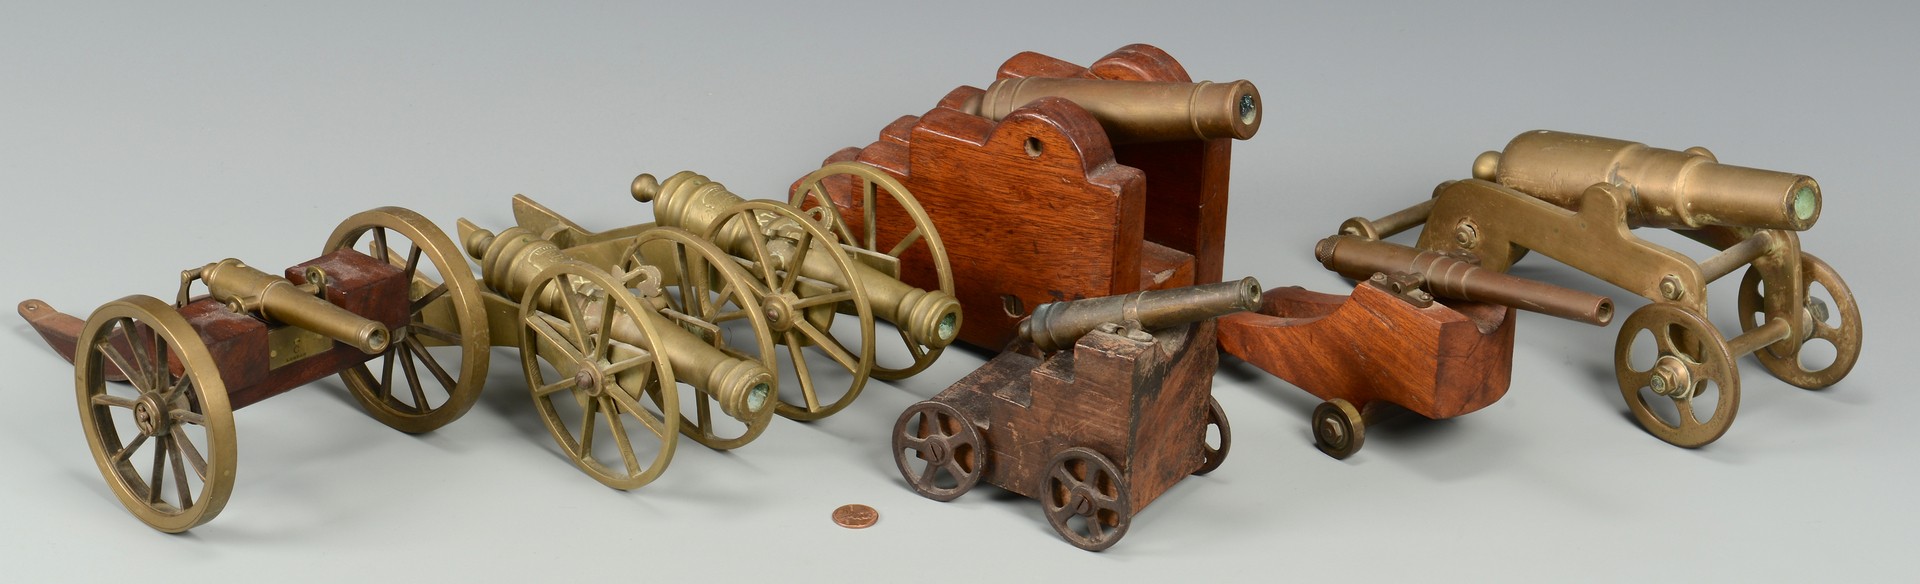 Lot 579: Group of 7 miniature cannons